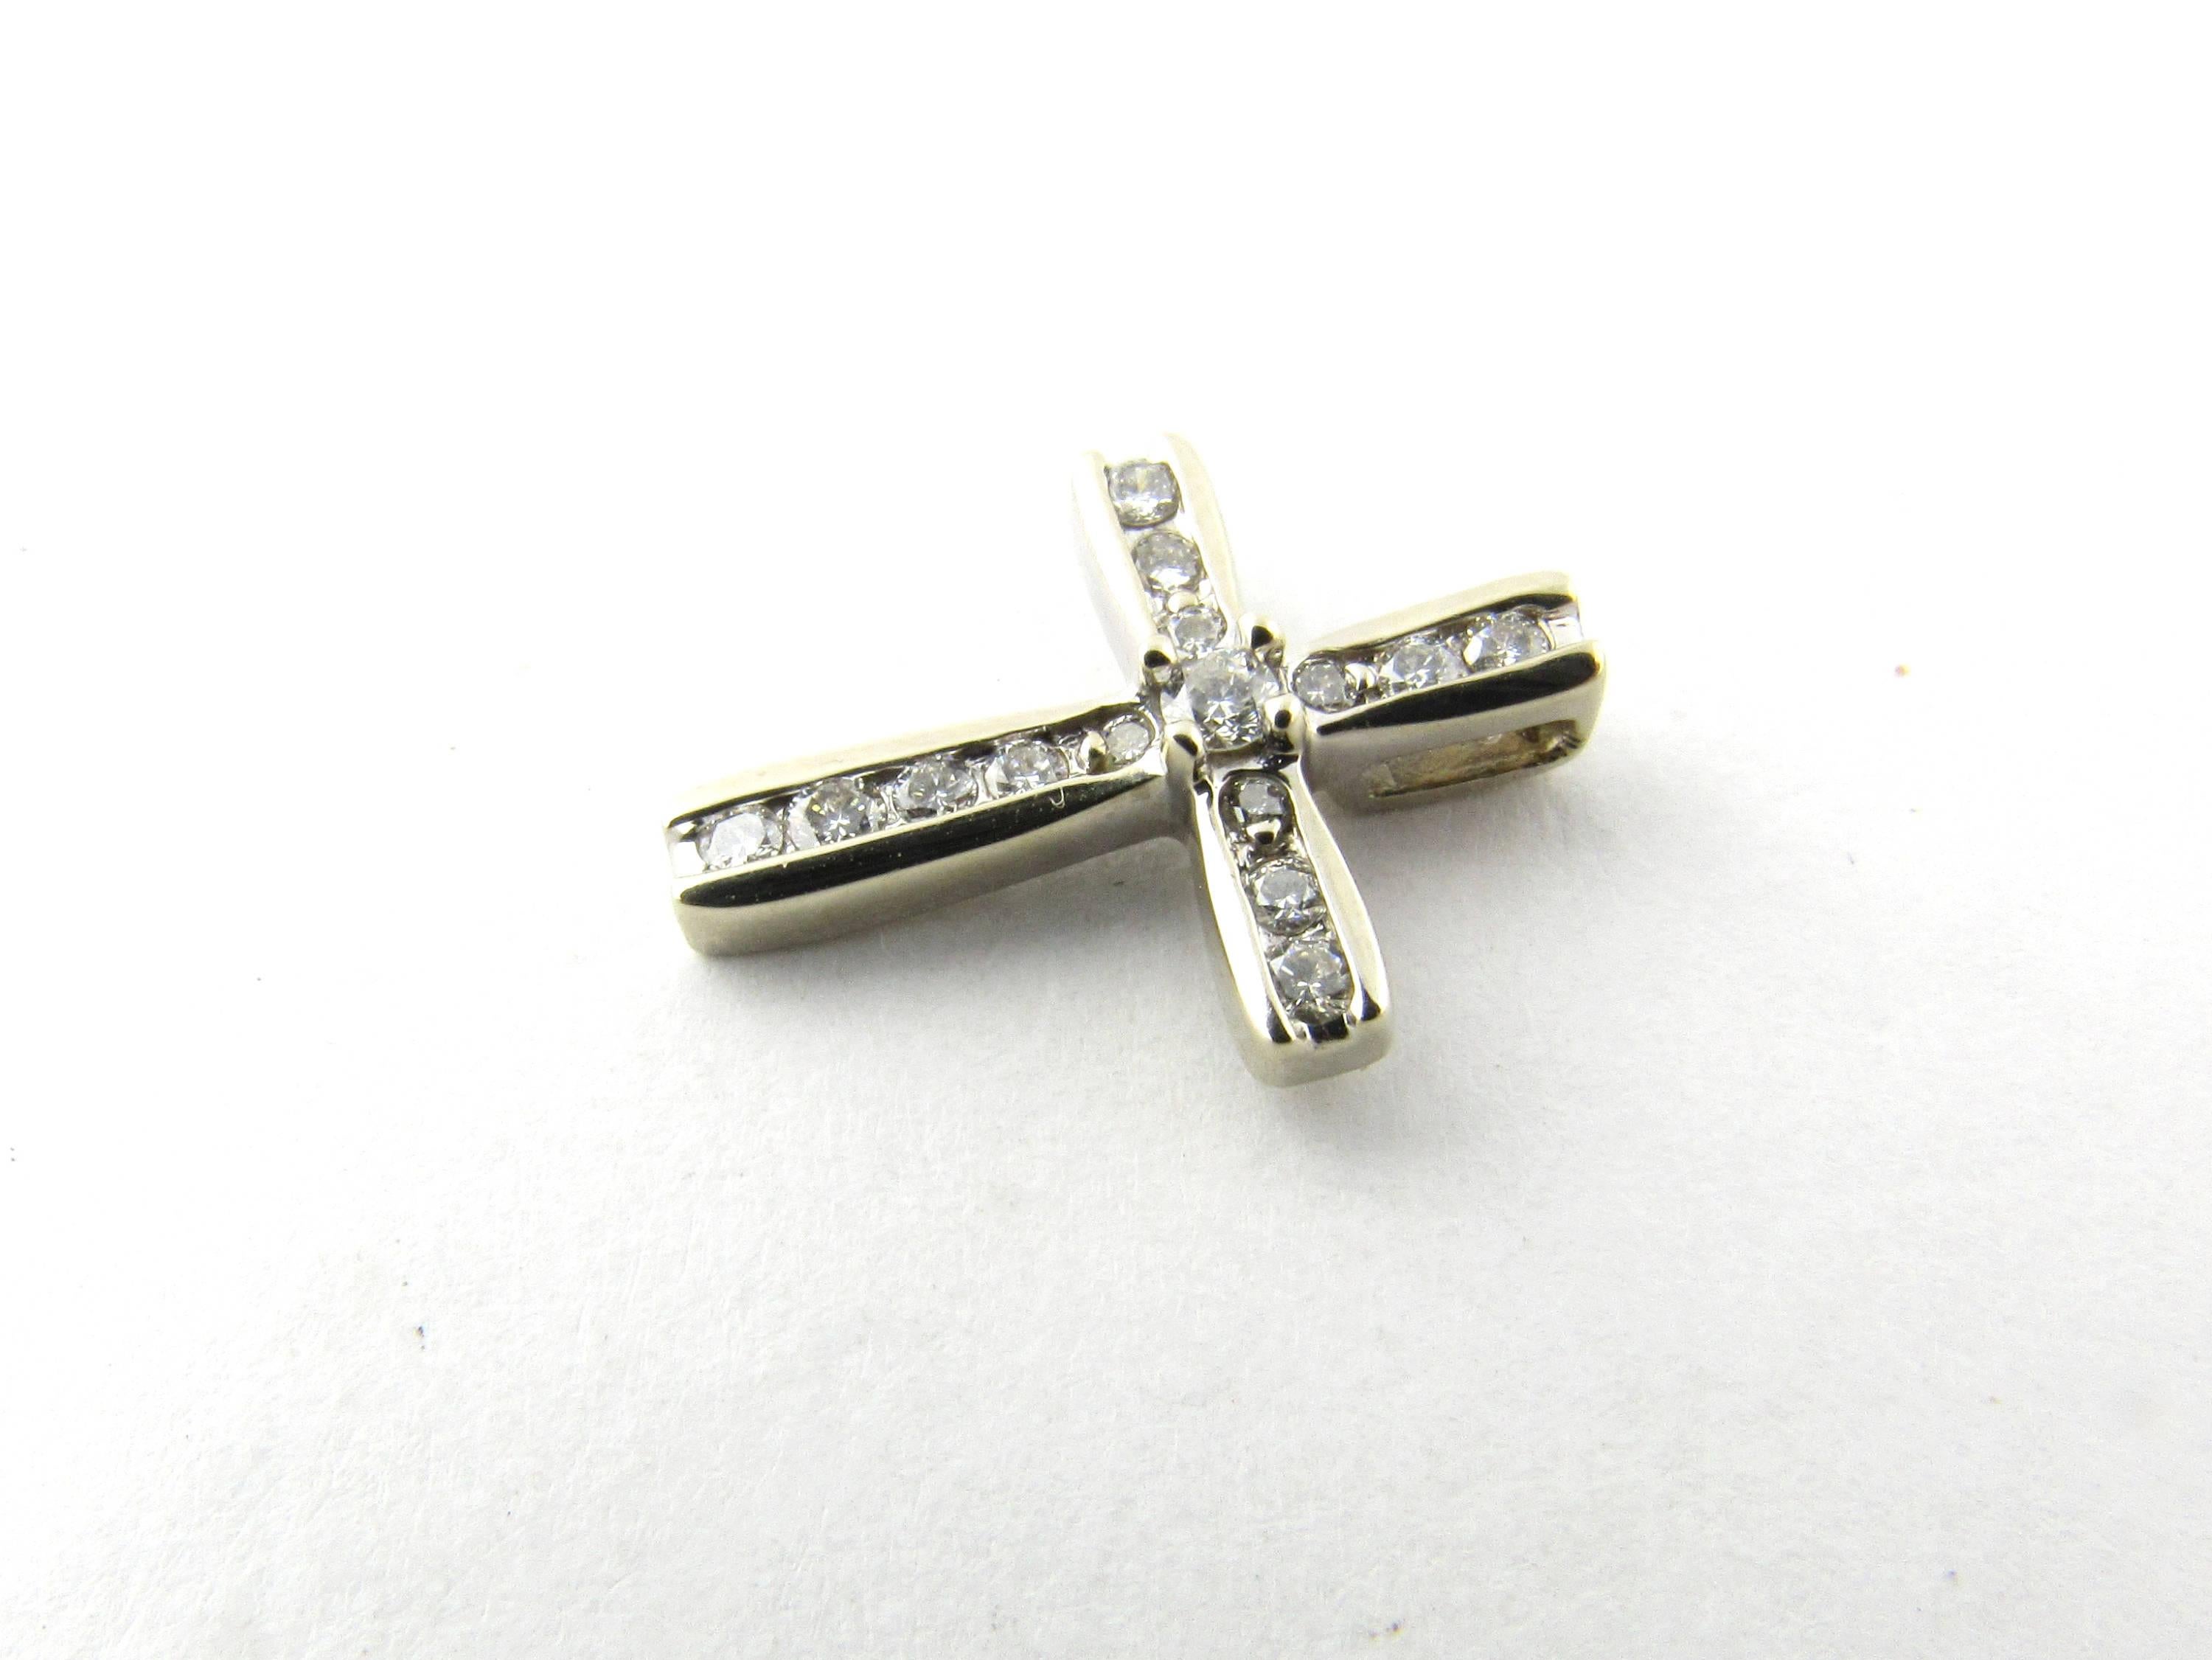 Vintage 10 Karat White Gold and Diamond Cross Pendant-

This exquisite cross pendant features five round brilliant cut diamonds in its center. Beautifully detailed in 10K white gold.

Approximate total diamond weight: .10 ct.

Diamond color: